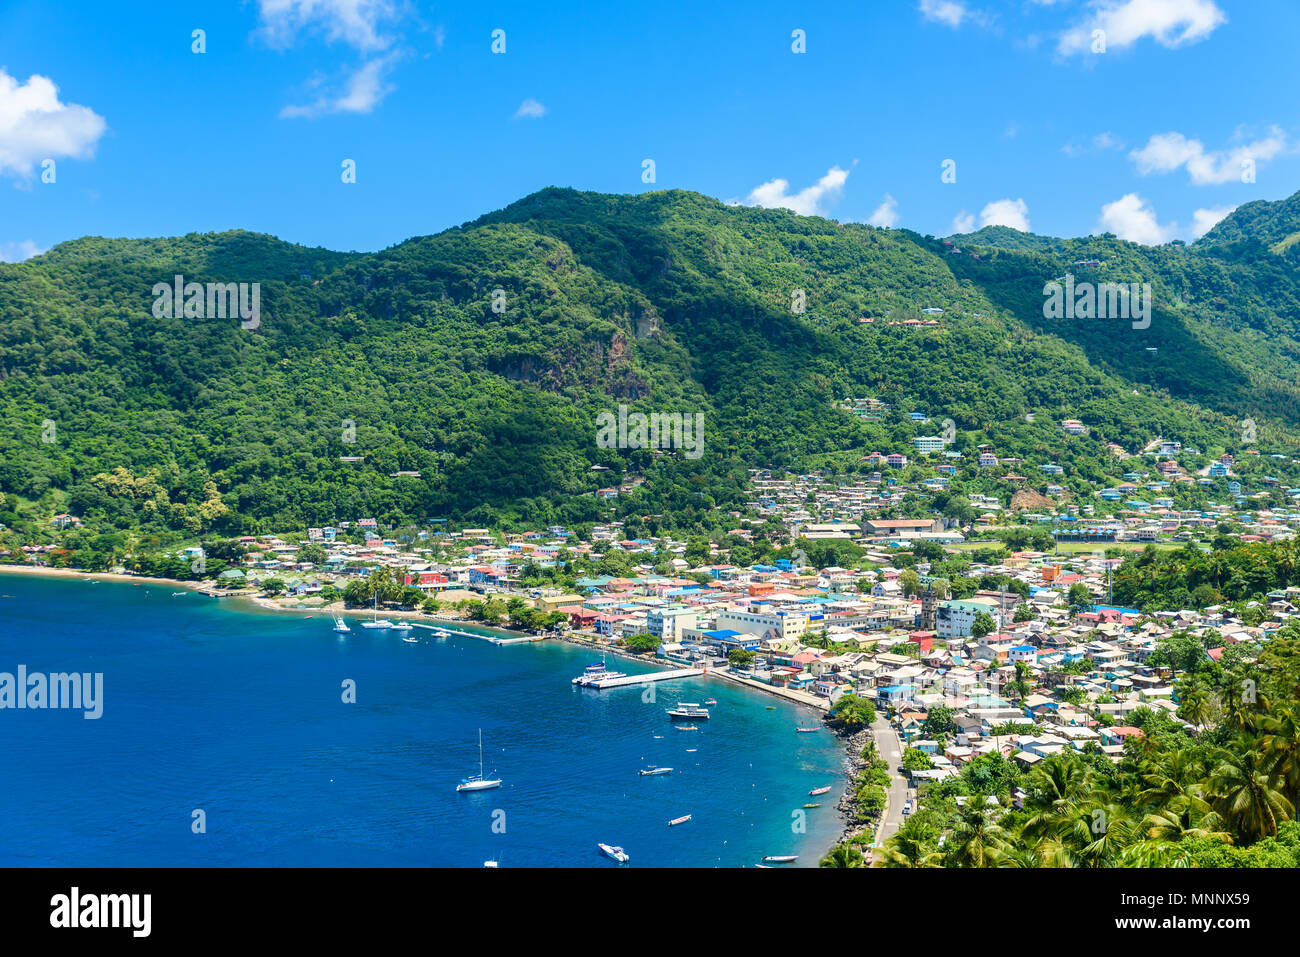 Soufriere Village - tropical coast on the Caribbean island of St. Lucia. It is a paradise destination with a white sand beach and turquoiuse sea. Stock Photo